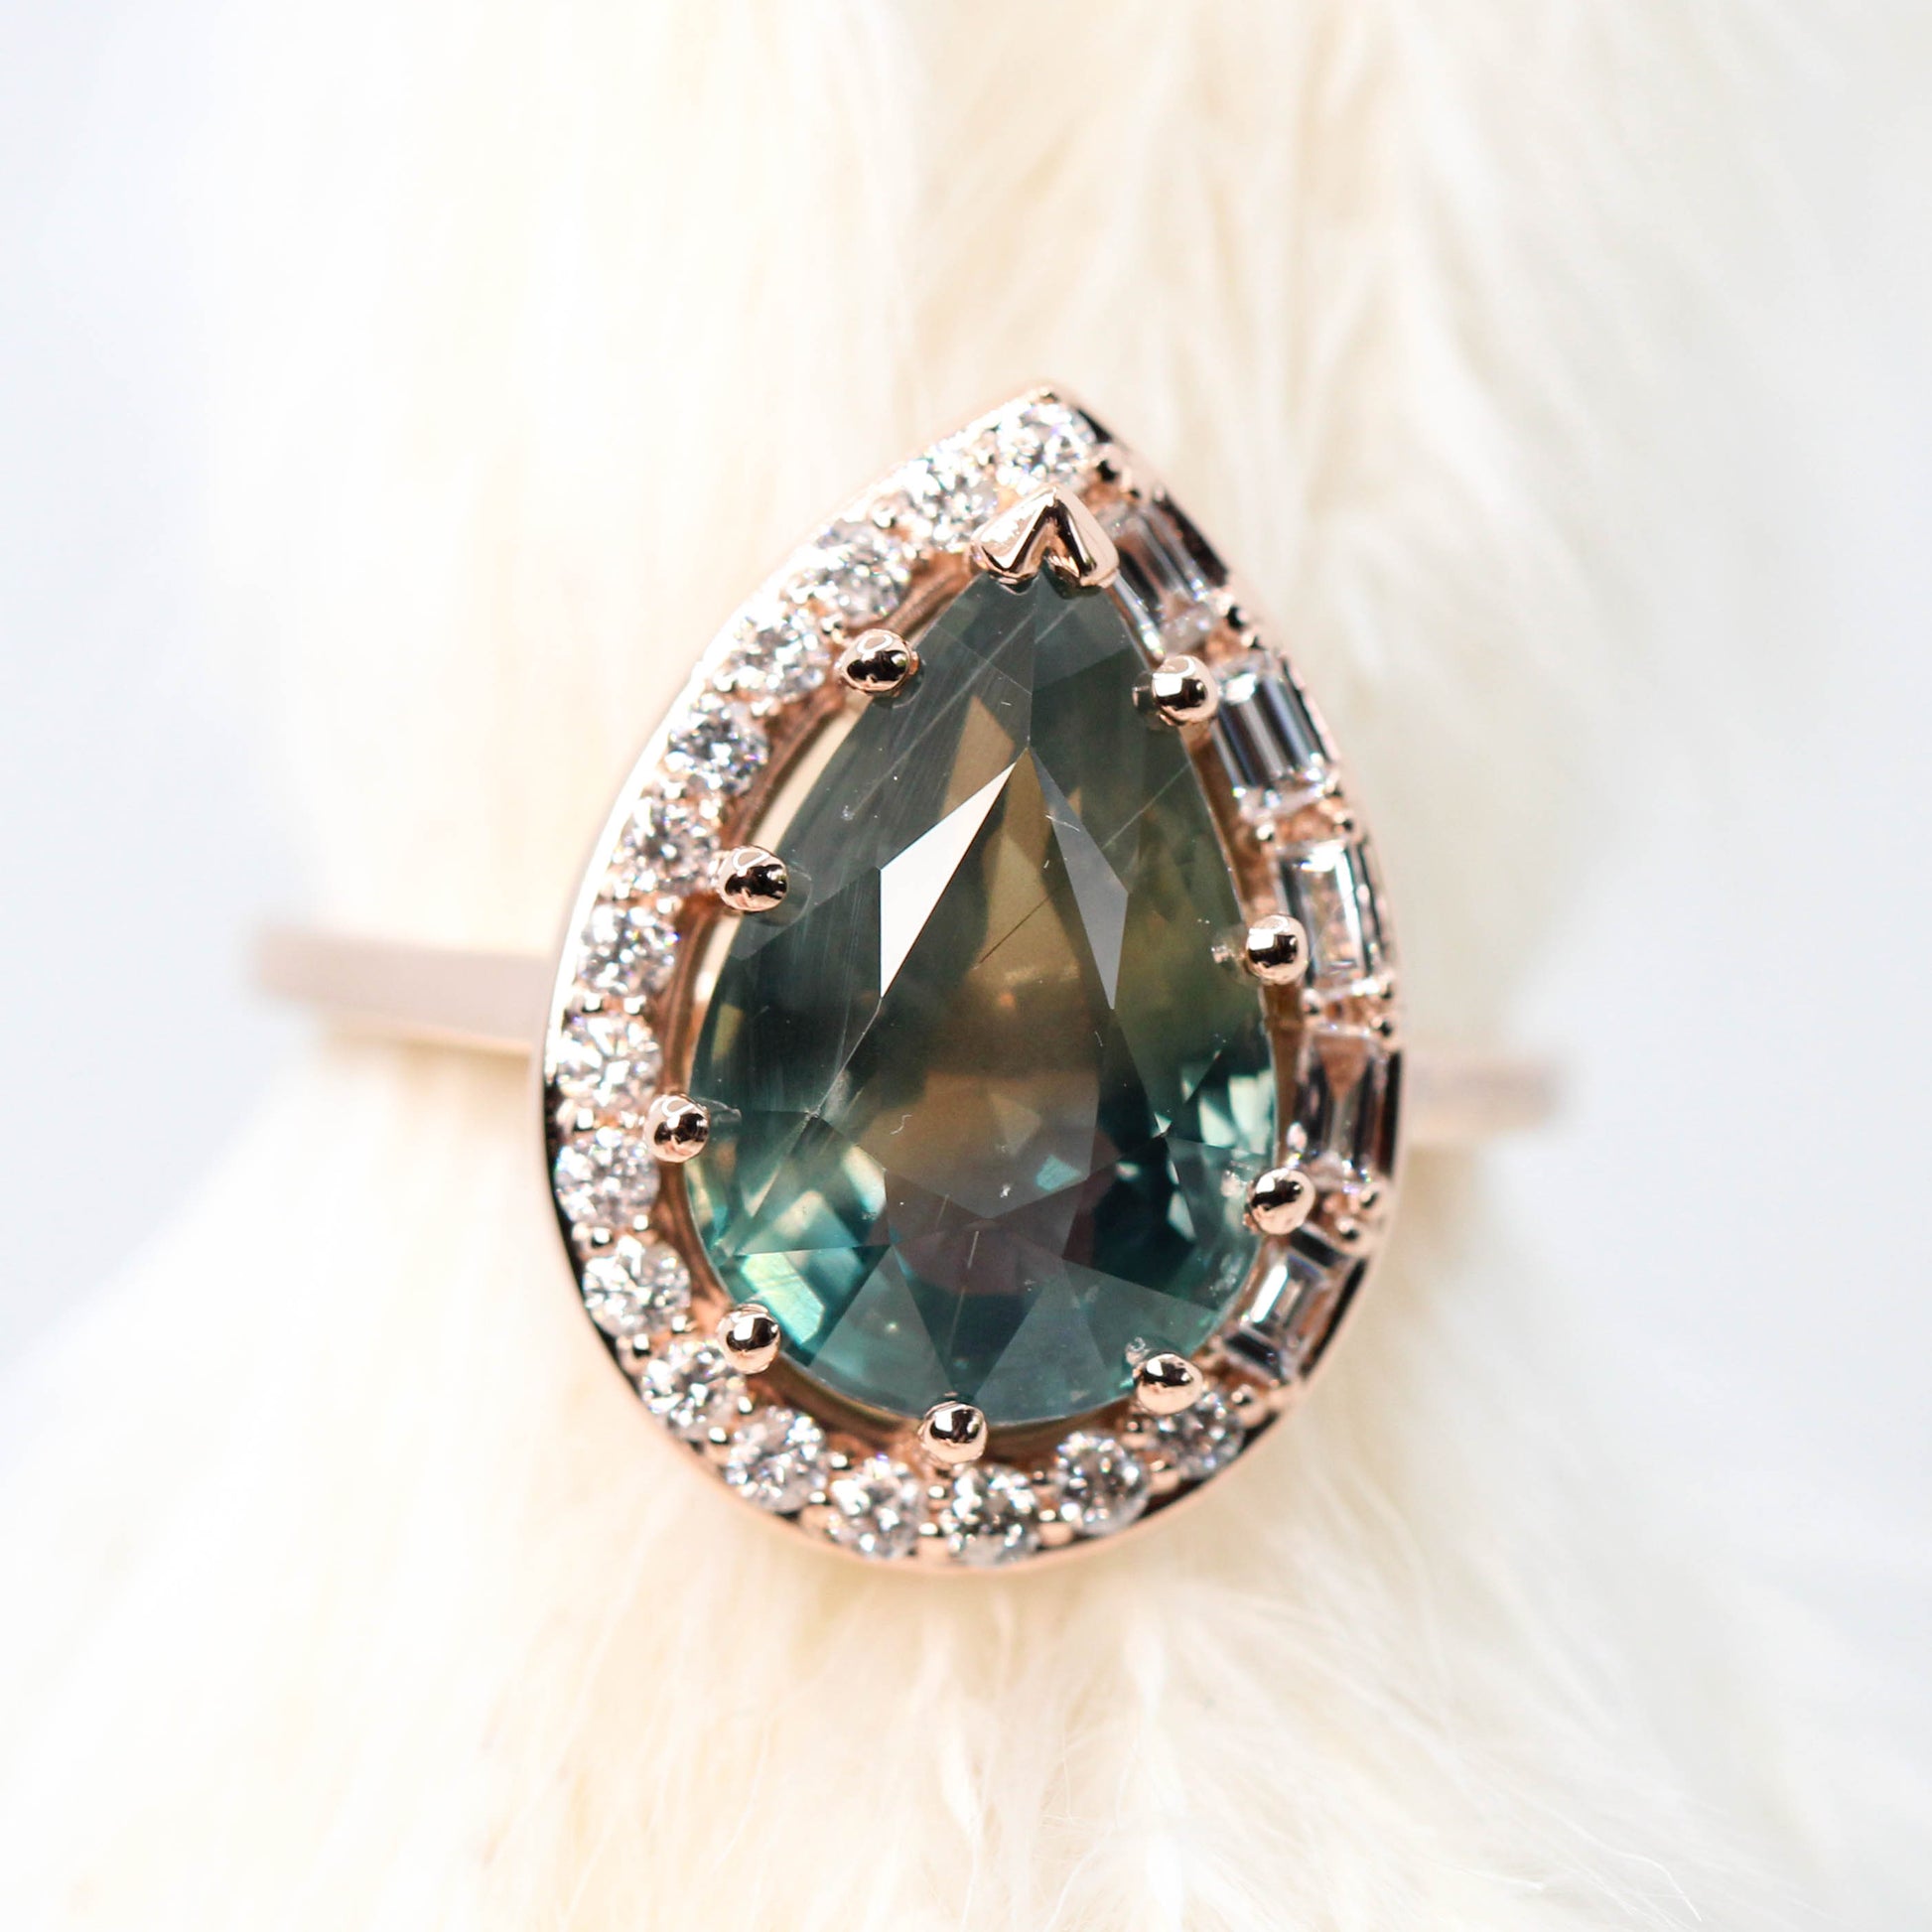 Collins Ring with a 6.21 Carat Teal Pear Sapphire and White Accent Diamonds in 14k Rose Gold - Ready to Size and Ship - Midwinter Co. Alternative Bridal Rings and Modern Fine Jewelry